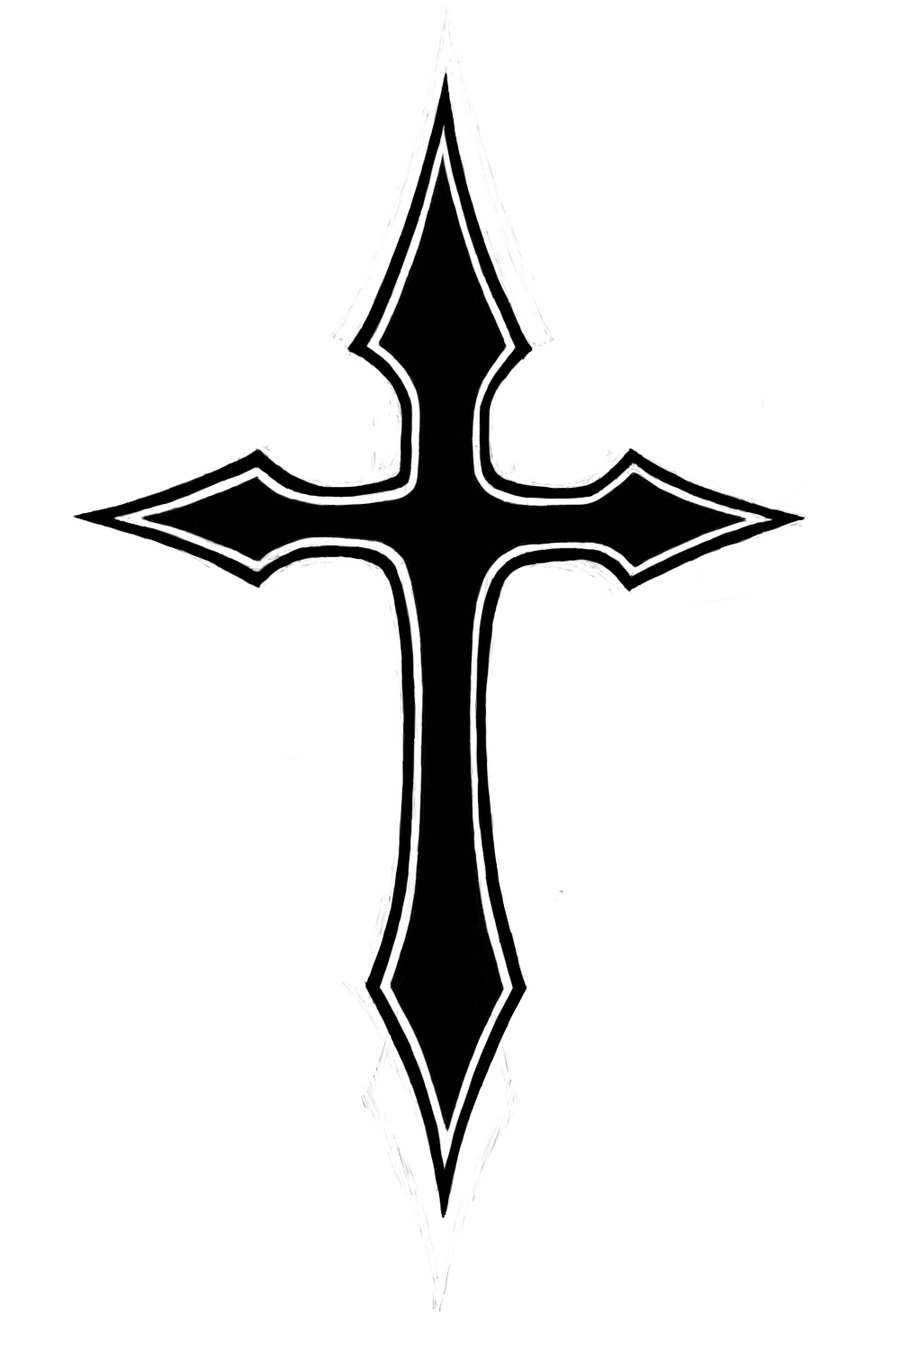 32 Black Cross Pictures   Free Cliparts That You Can Download To You